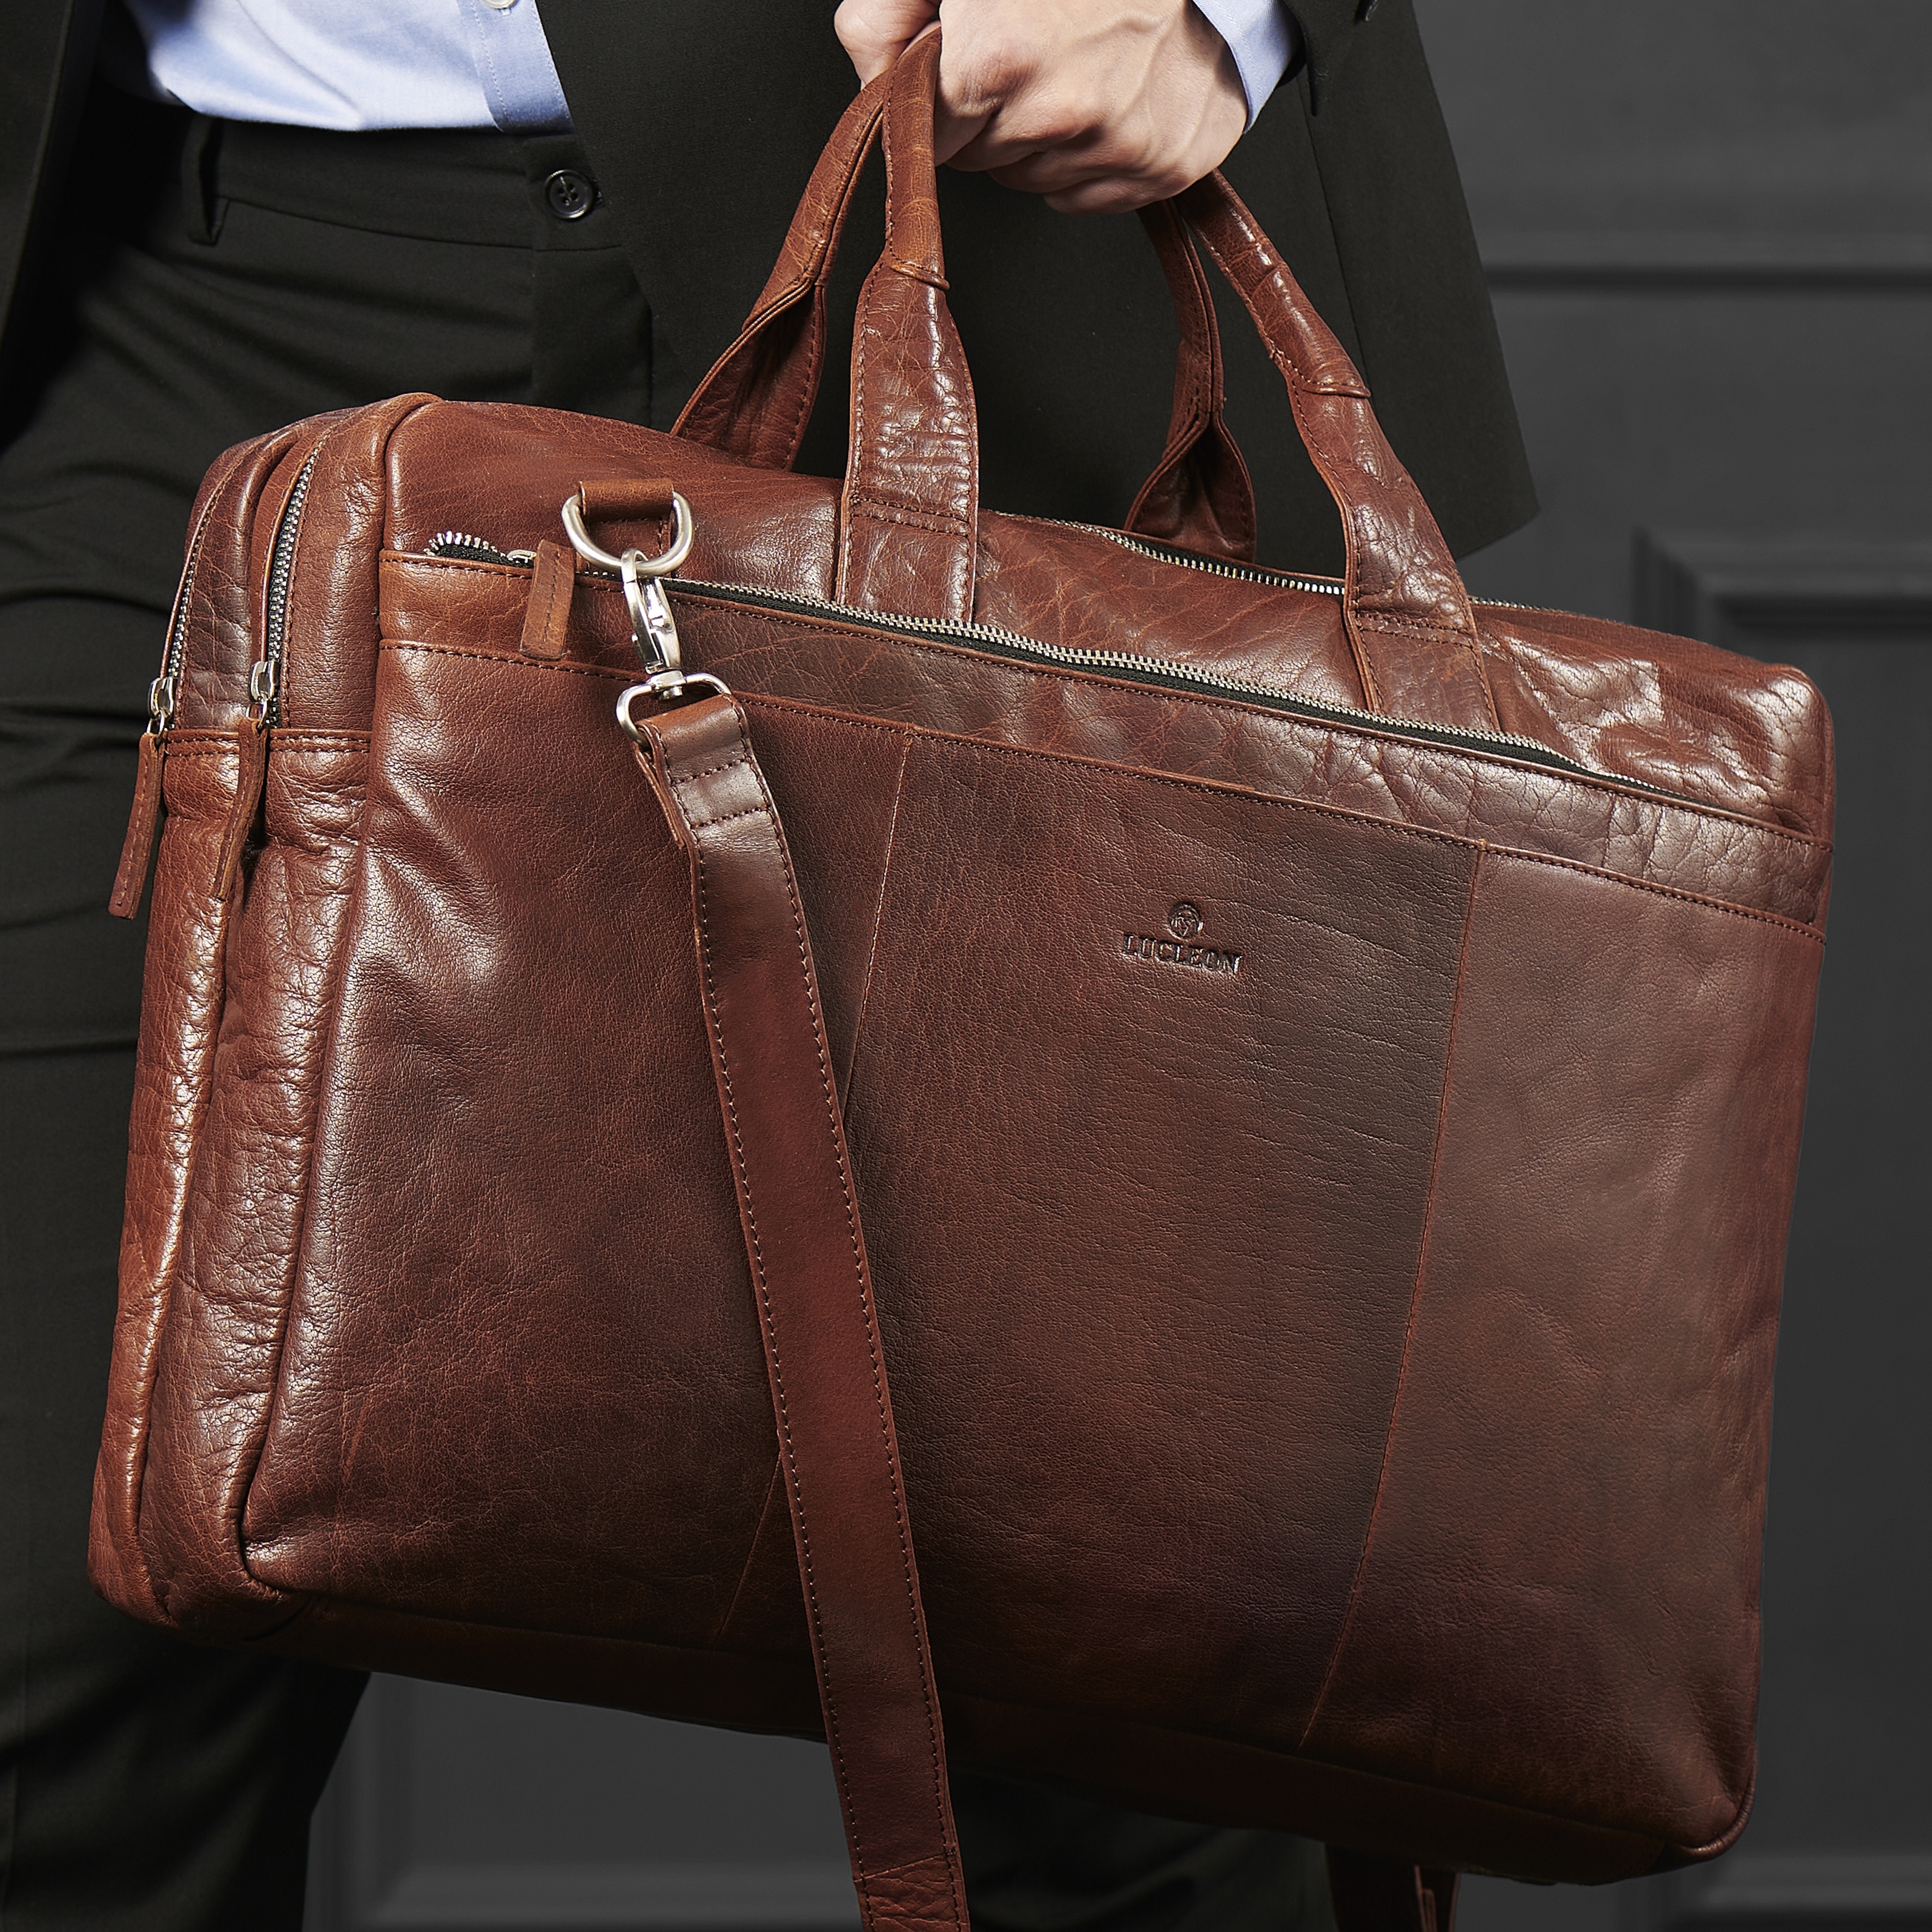 Montreal | XL Tan Leather Laptop Bag - for Men - Lucleon